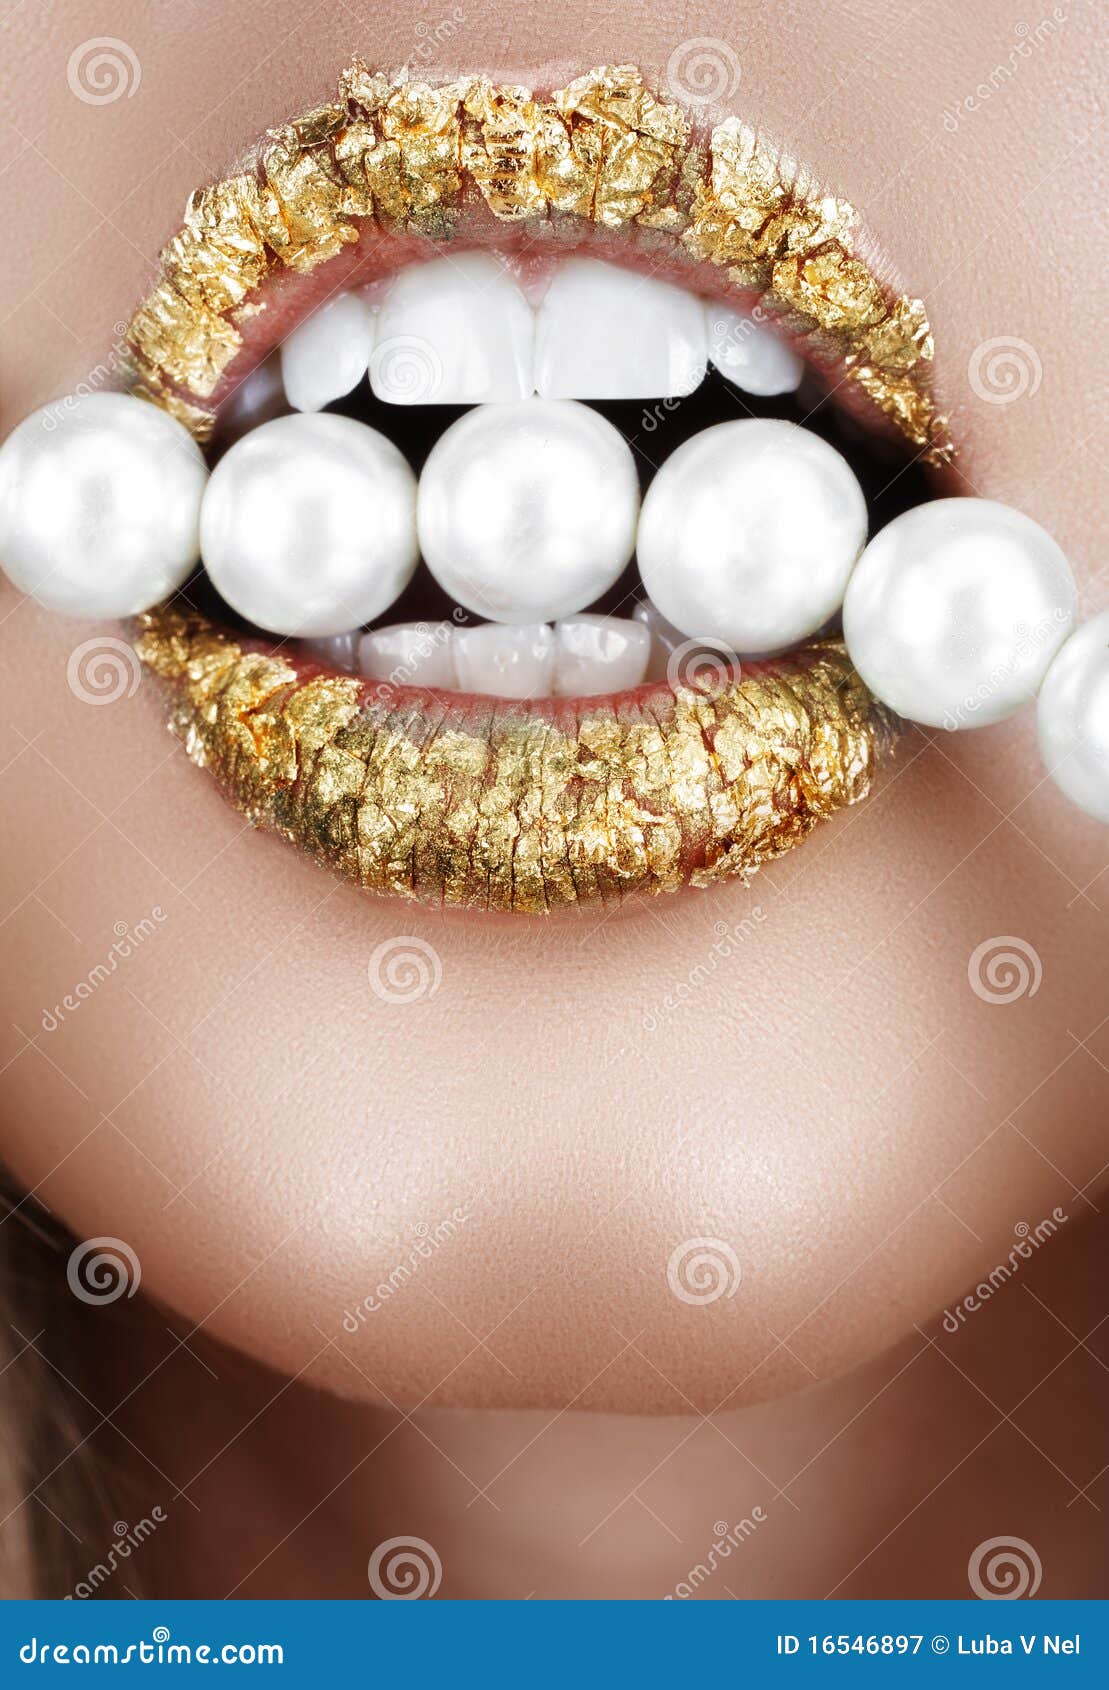 gold leaf mouth pearls 16546897